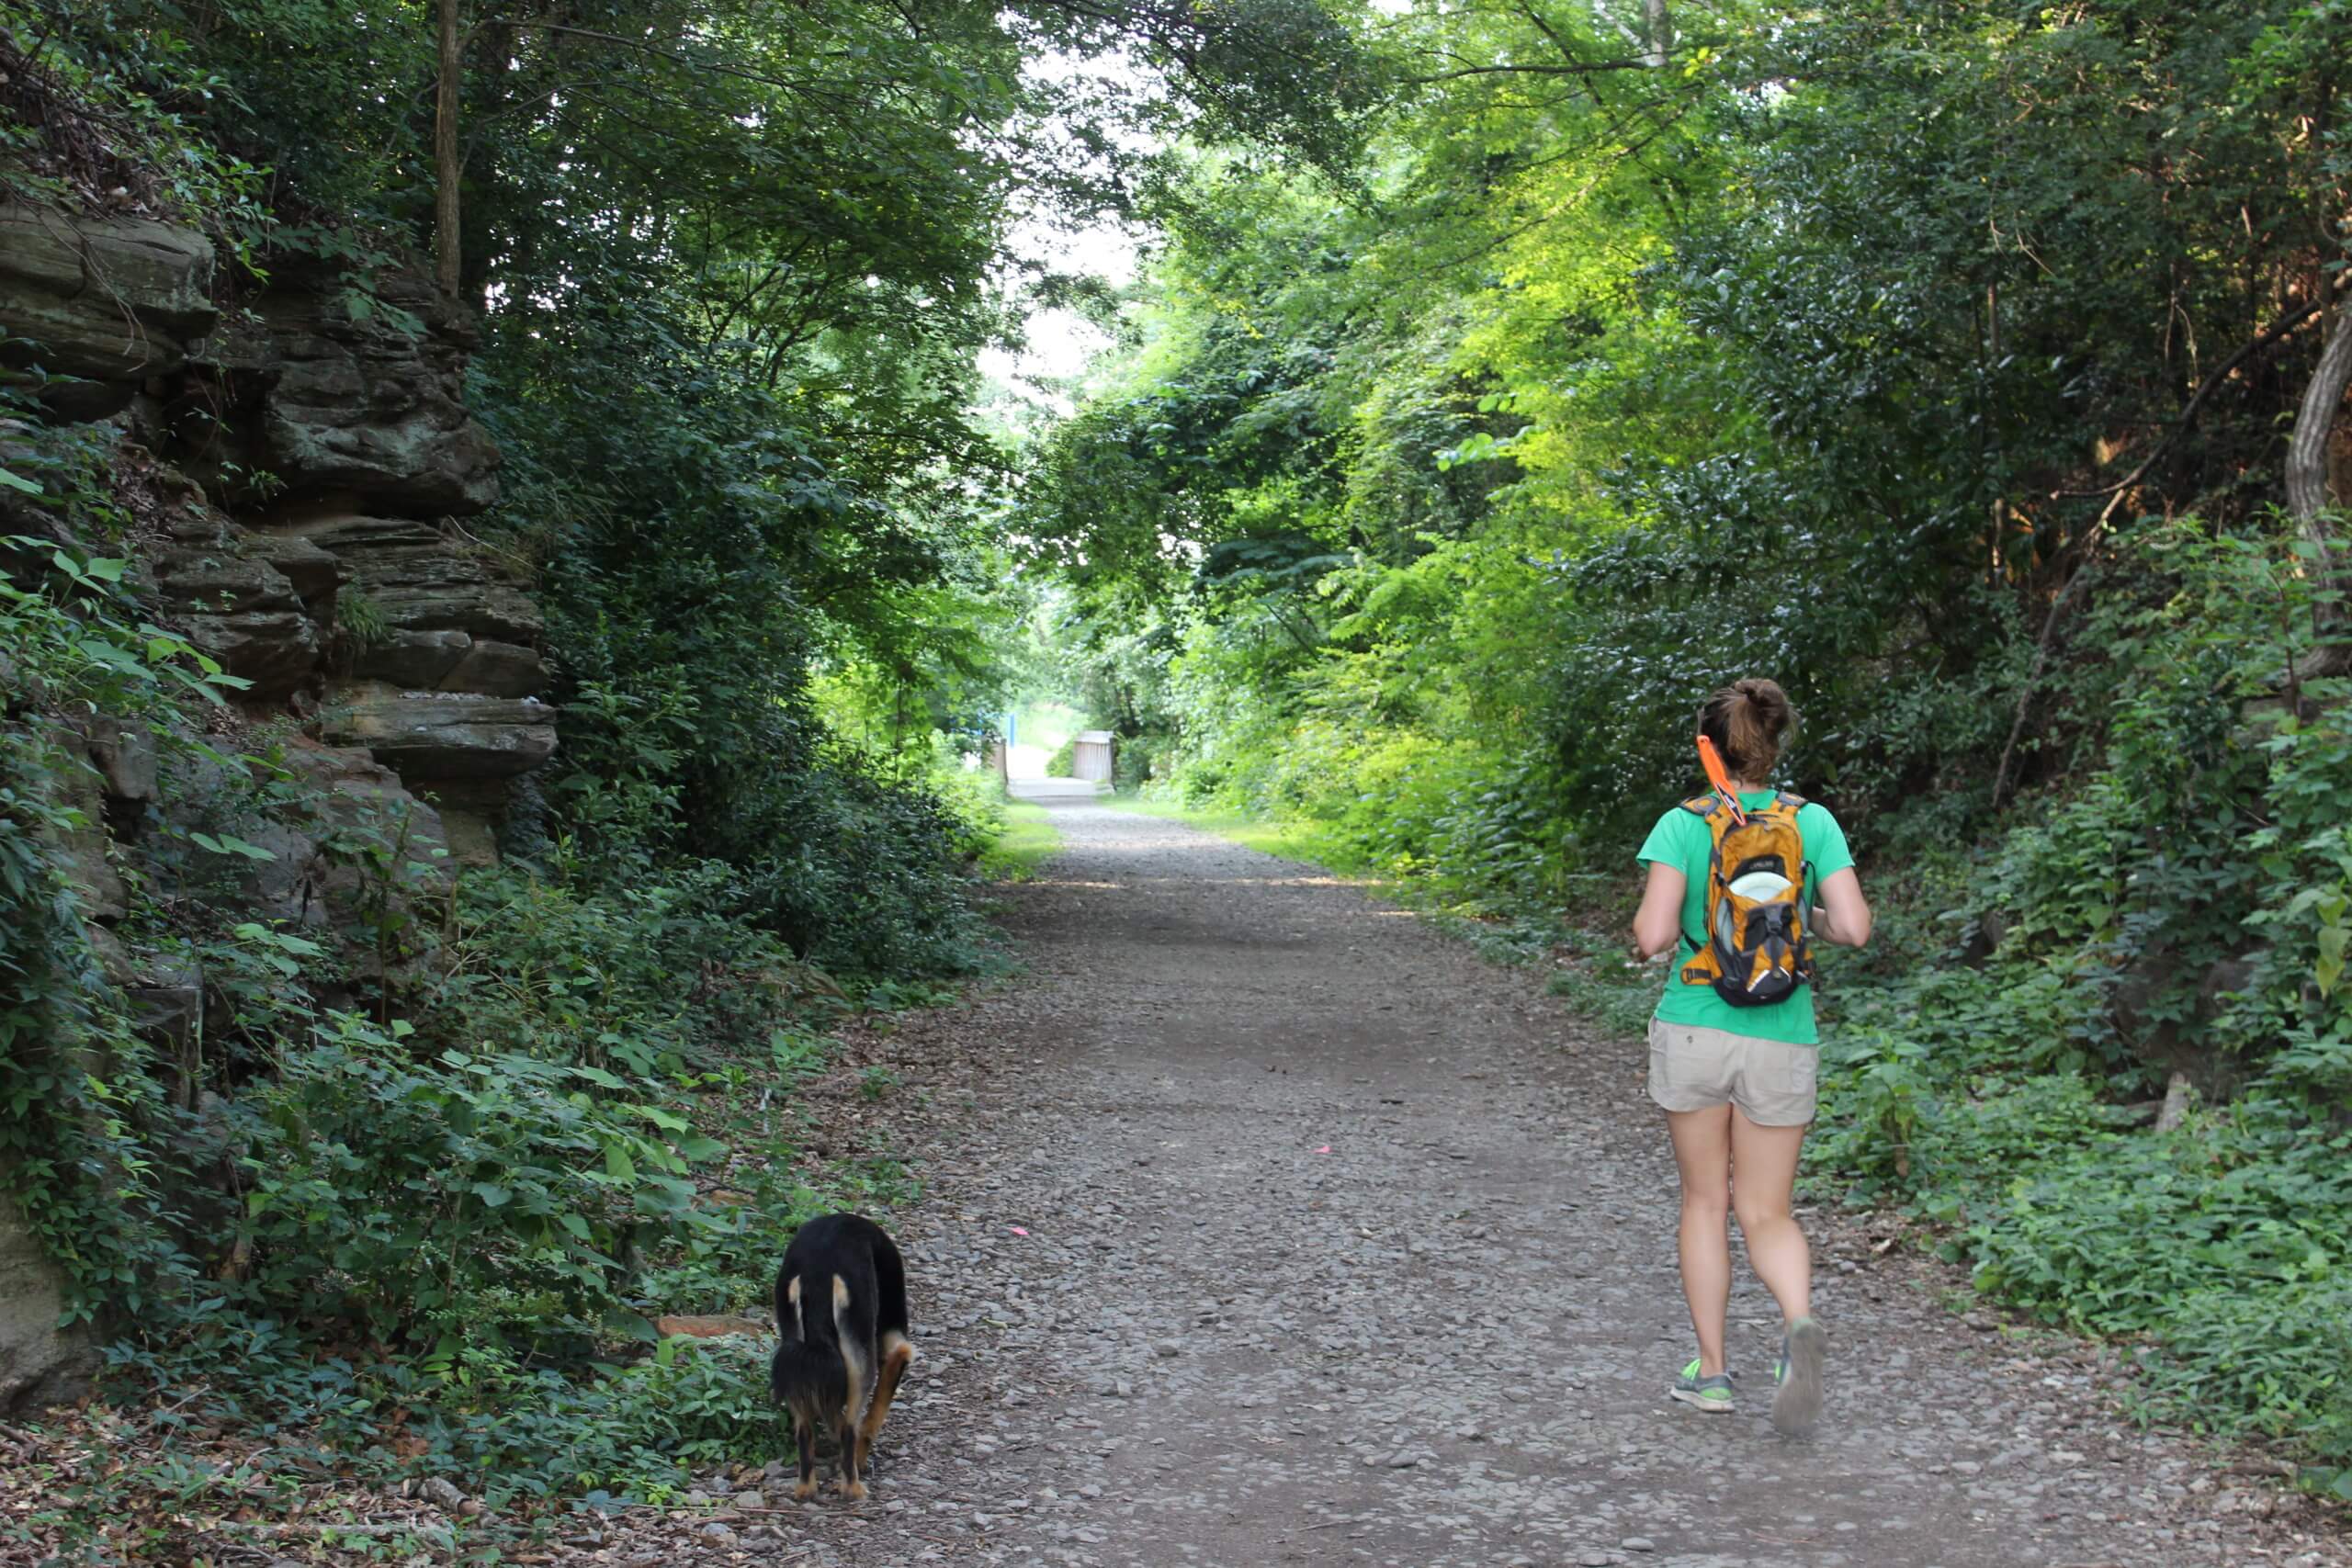 Nicole and her dog walk down a shaded portion of the Atlanta BeltLine's Eastside Trail in 2013